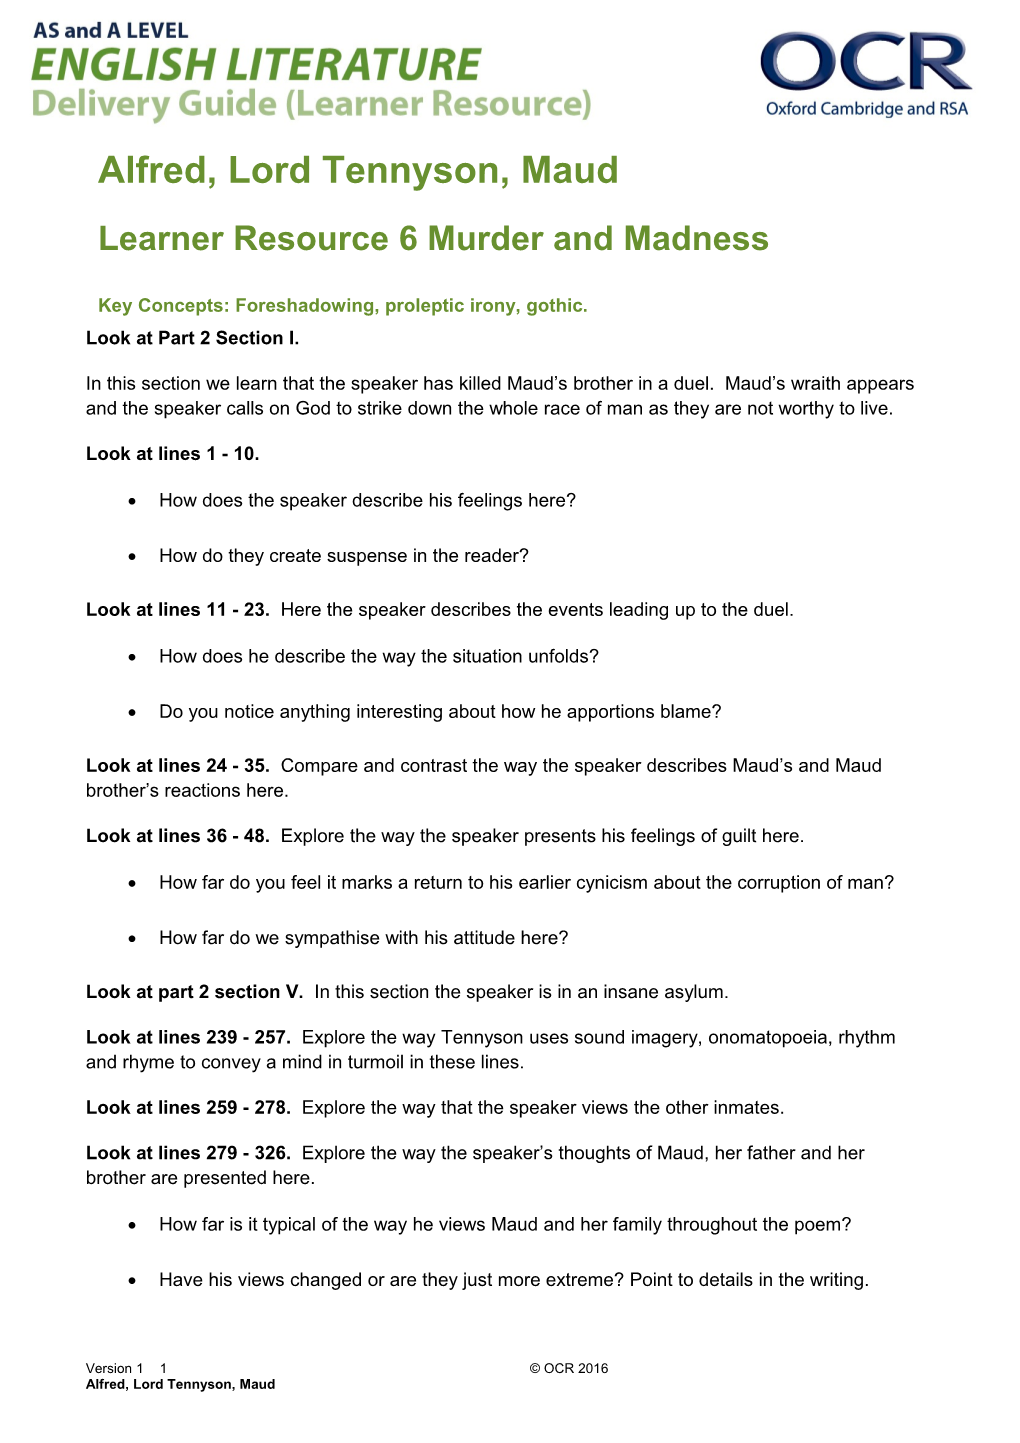 OCR a and AS Level English Literature, Alfred, Lord Tennyson - Maud Learner Resource 6